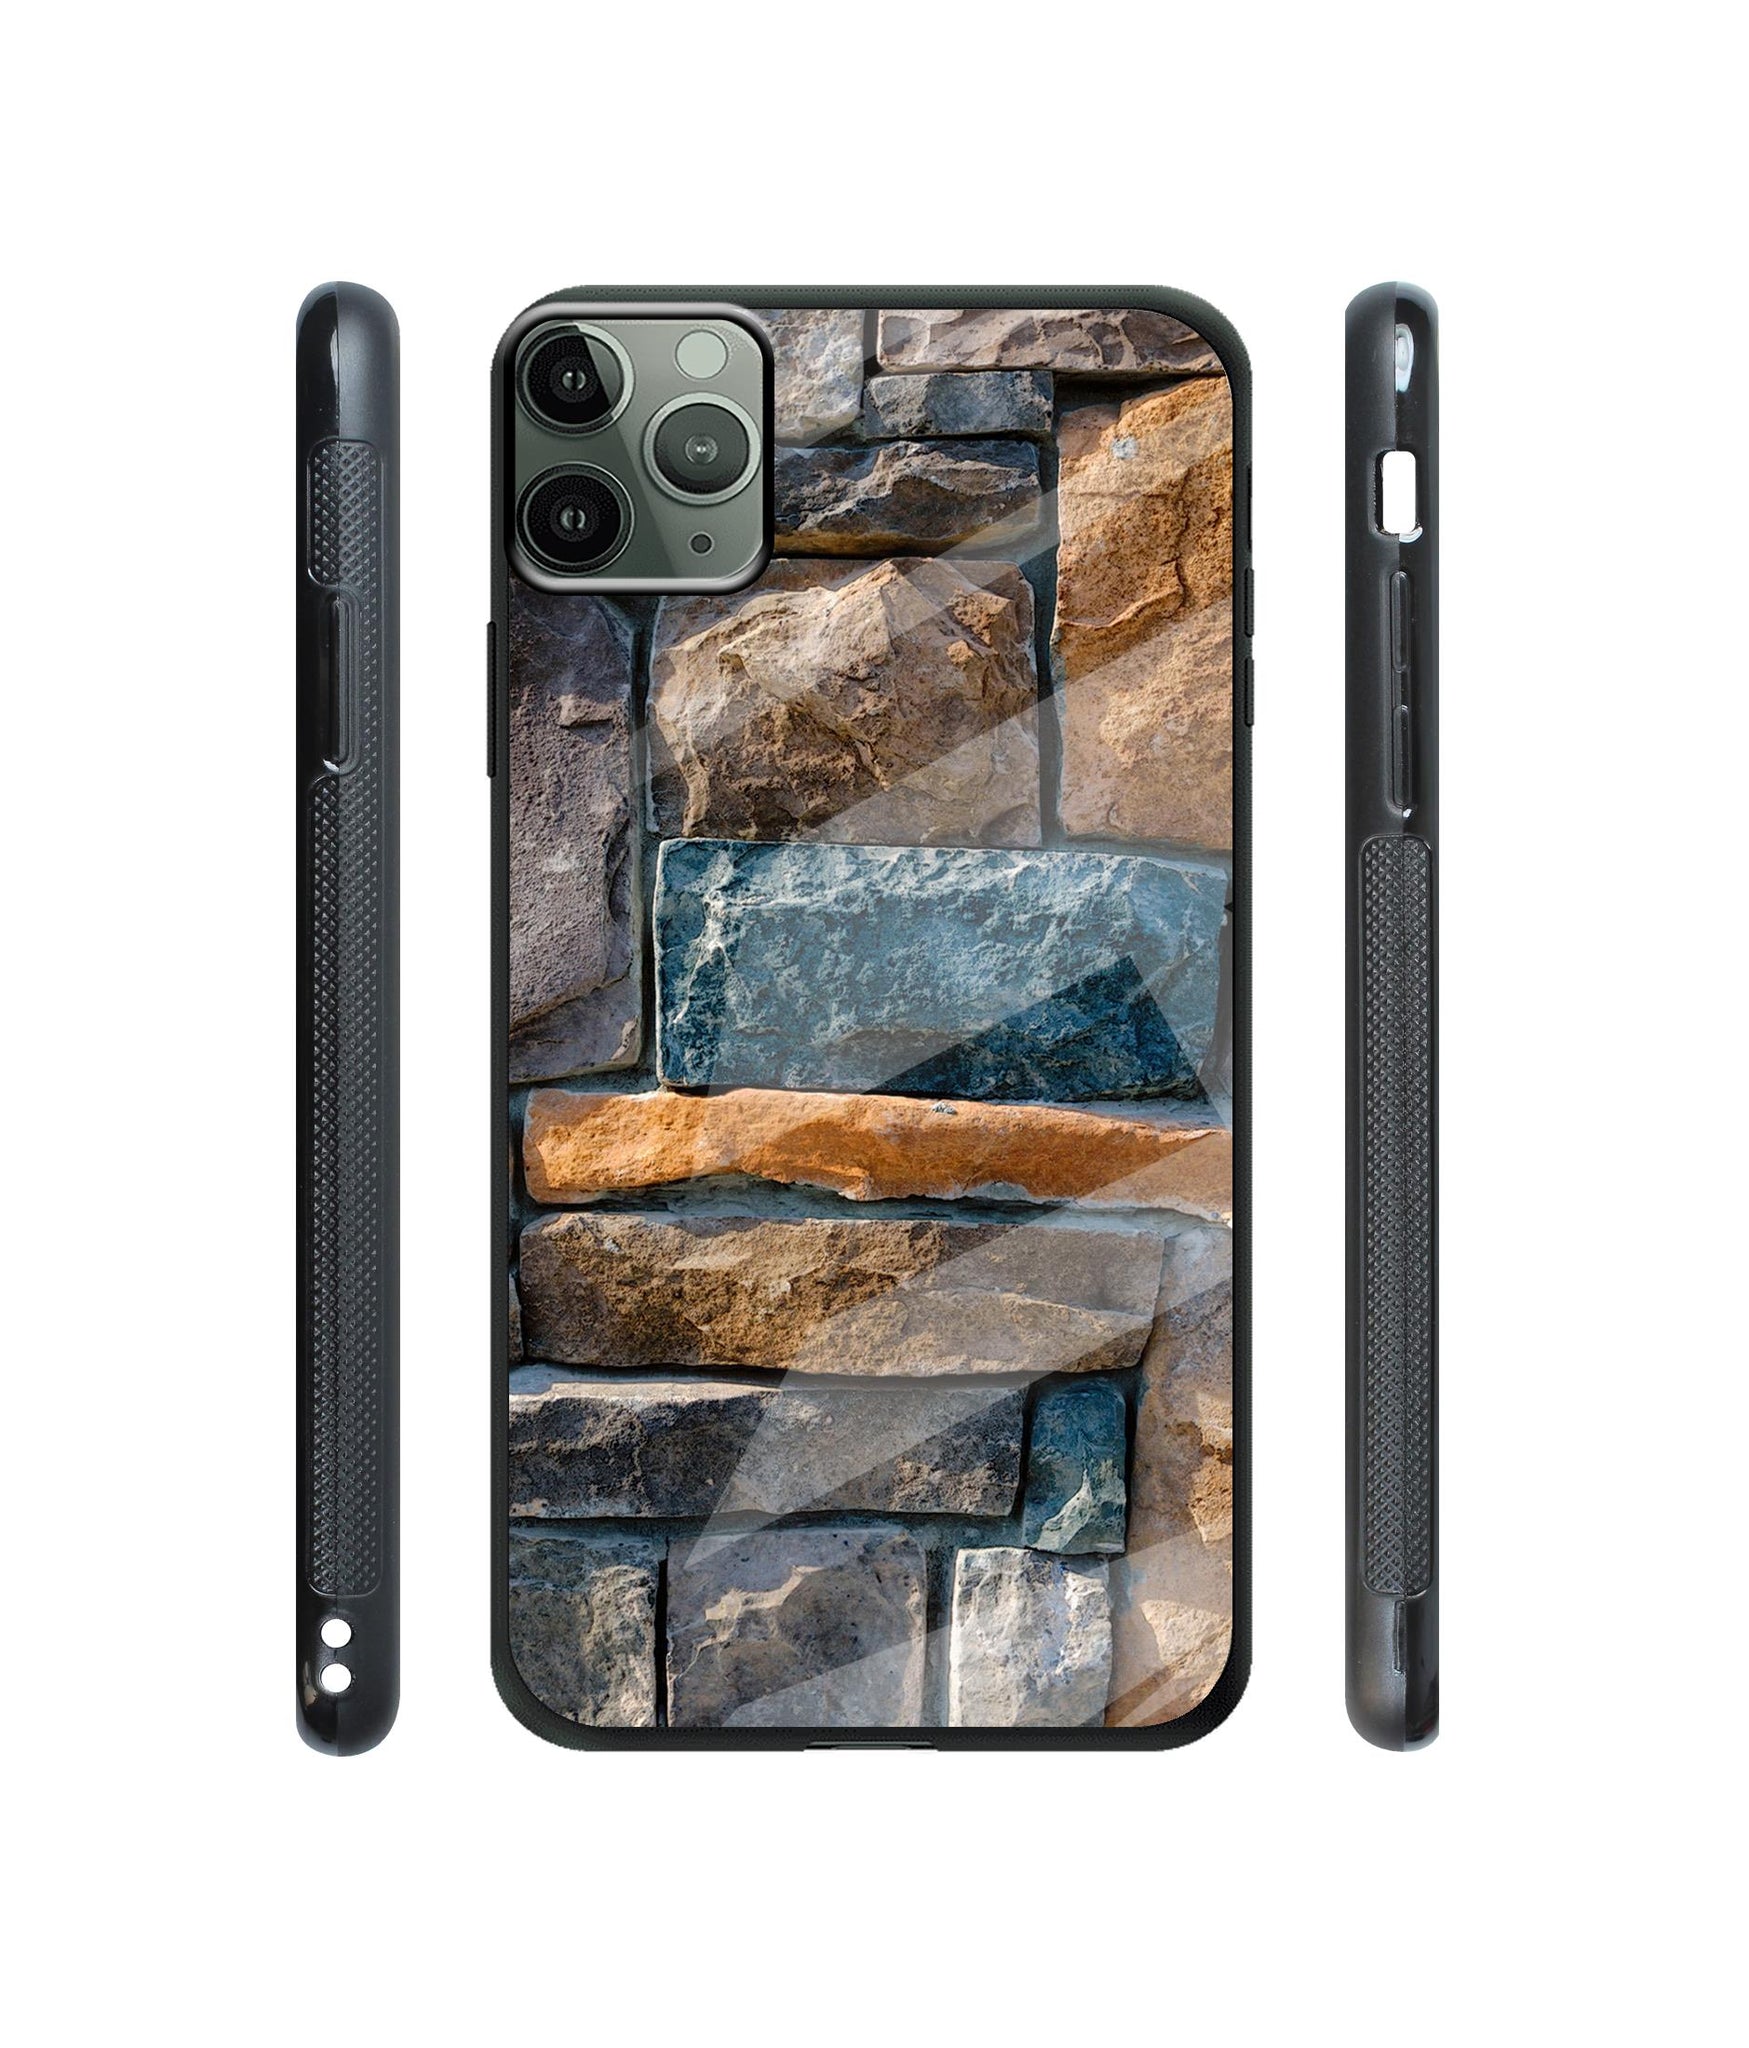 Decorative Stone Cladding Designer Printed Glass Cover for Apple iPhone 11 Pro